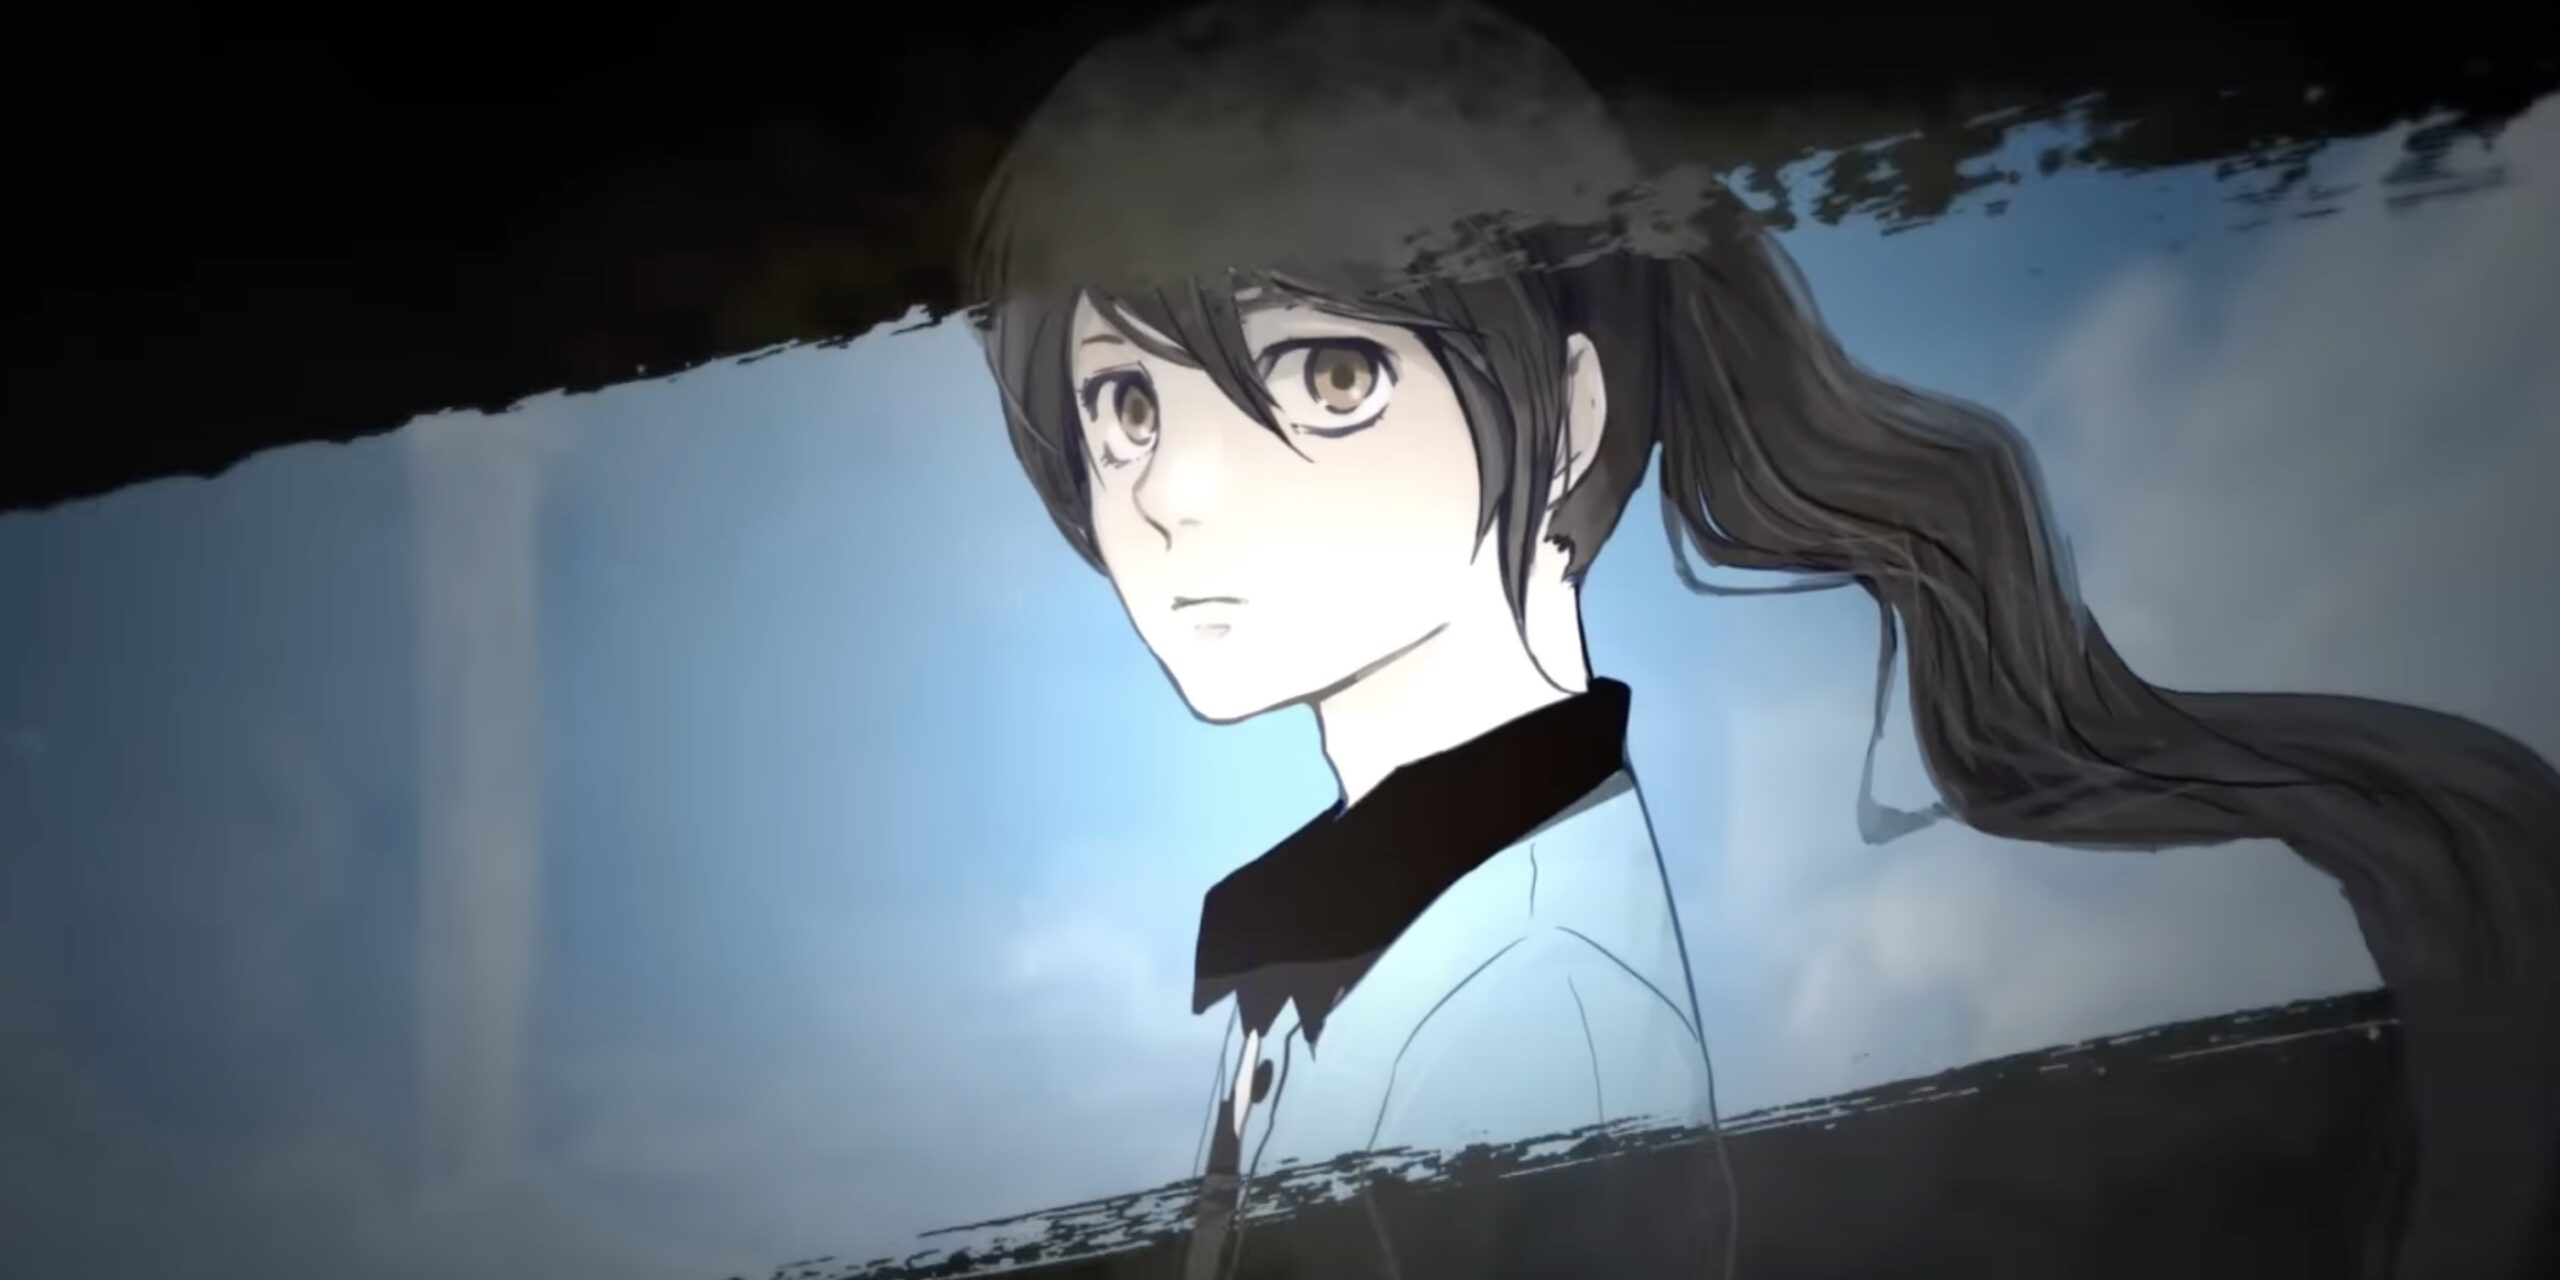 Tower of God Season 2 Release Date Revealed